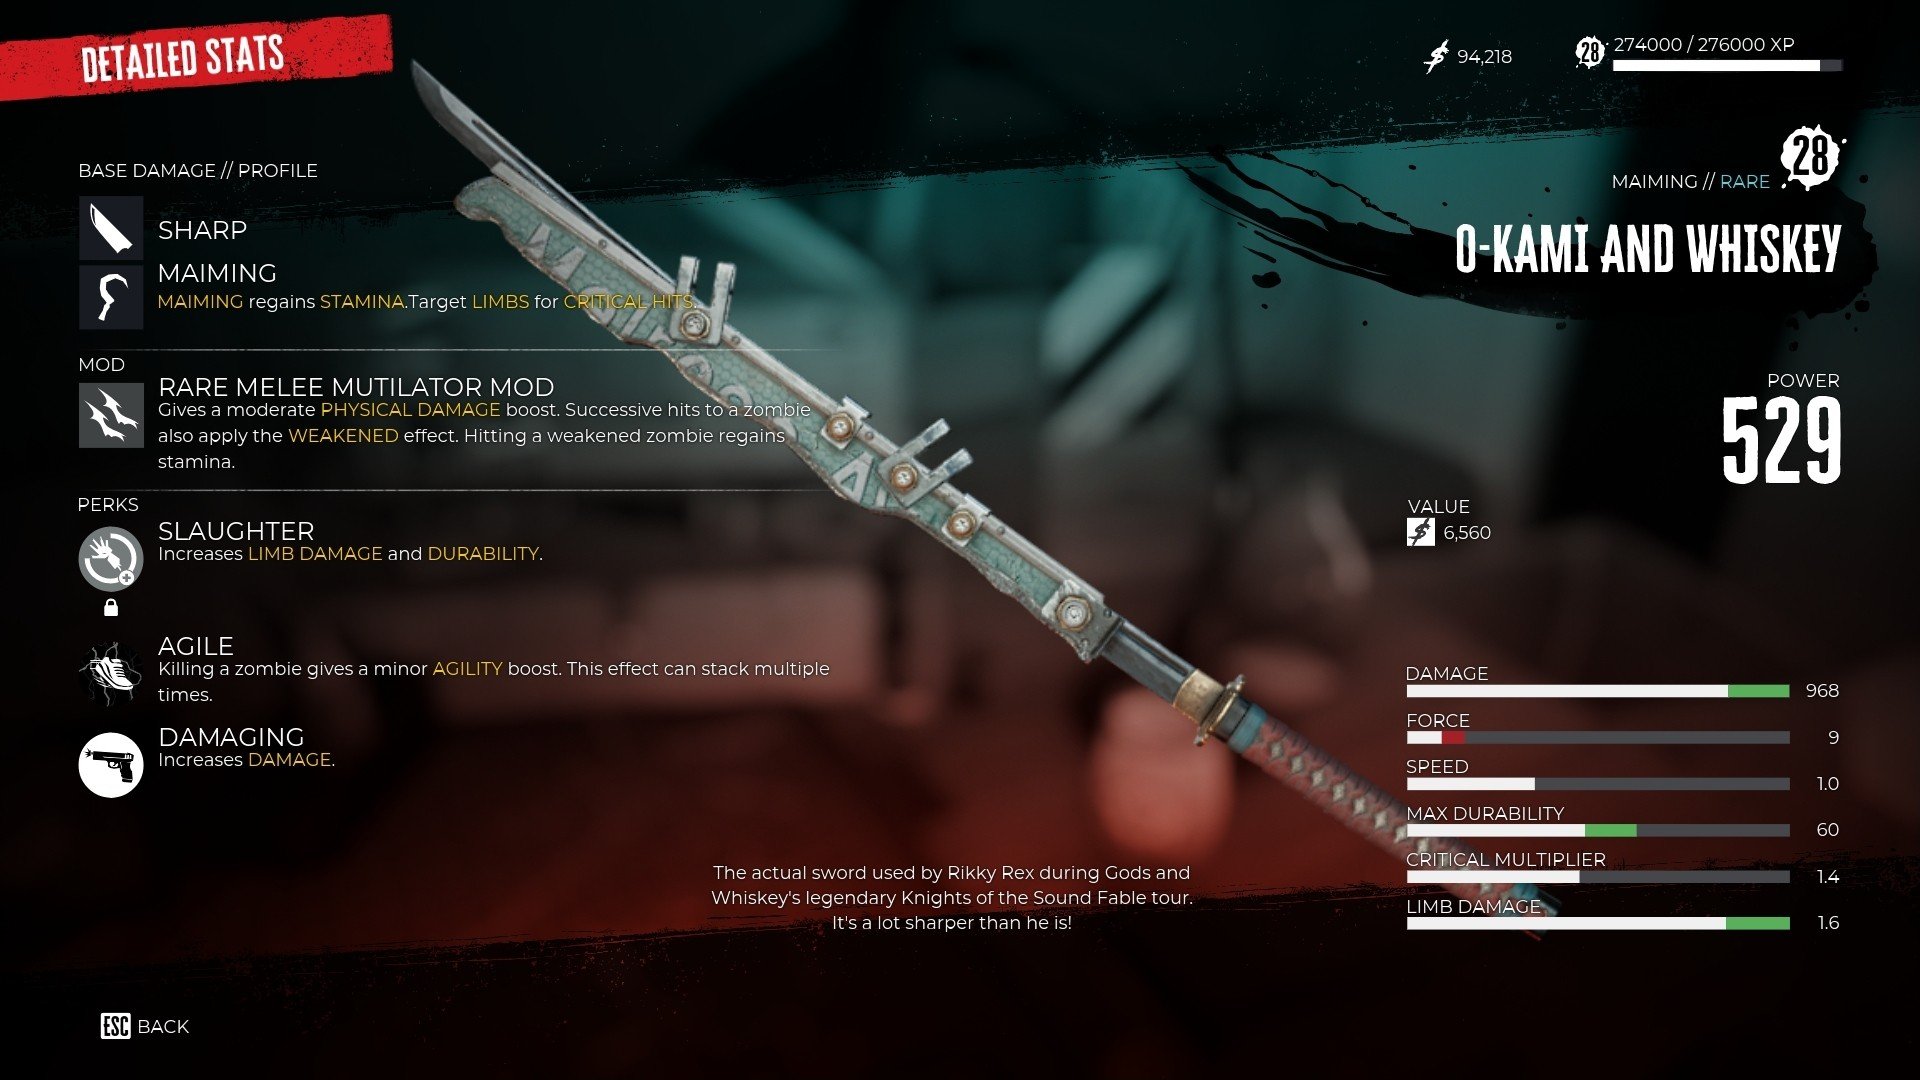 Dead Island 2 menu showing a katan in the center surrounded by boxes filled with statistical information about the weapon. 